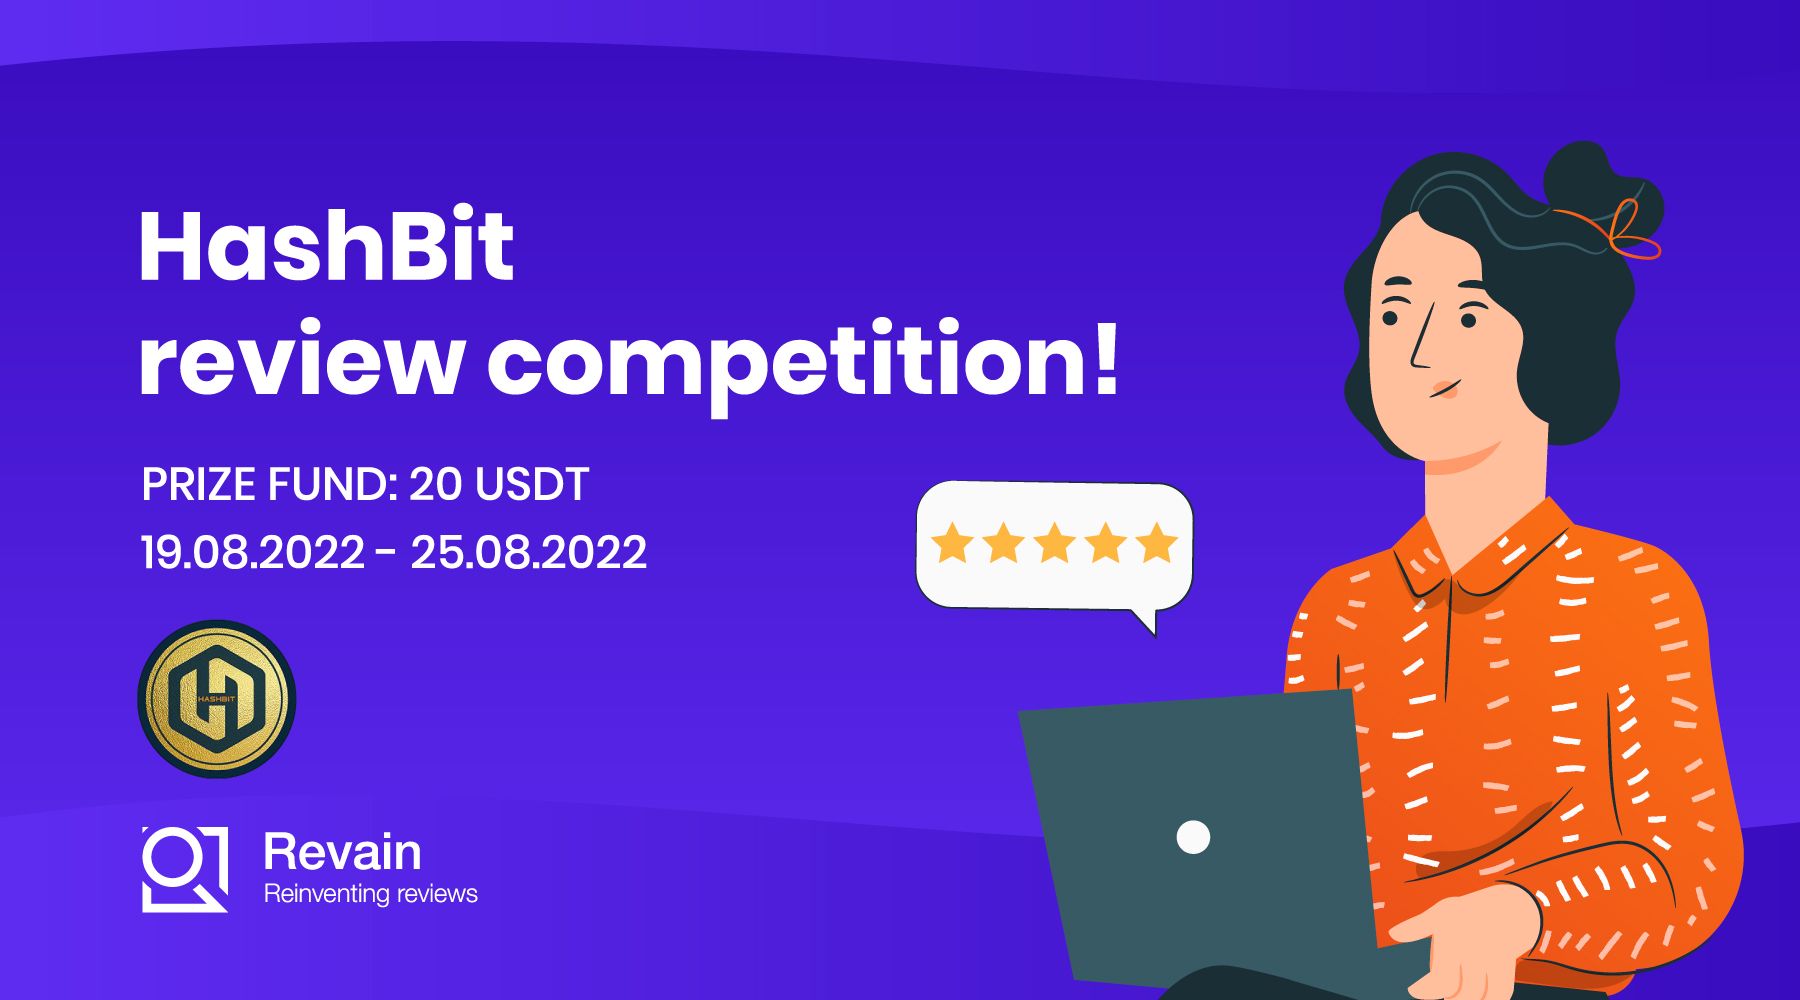 Article HashBit review competition!